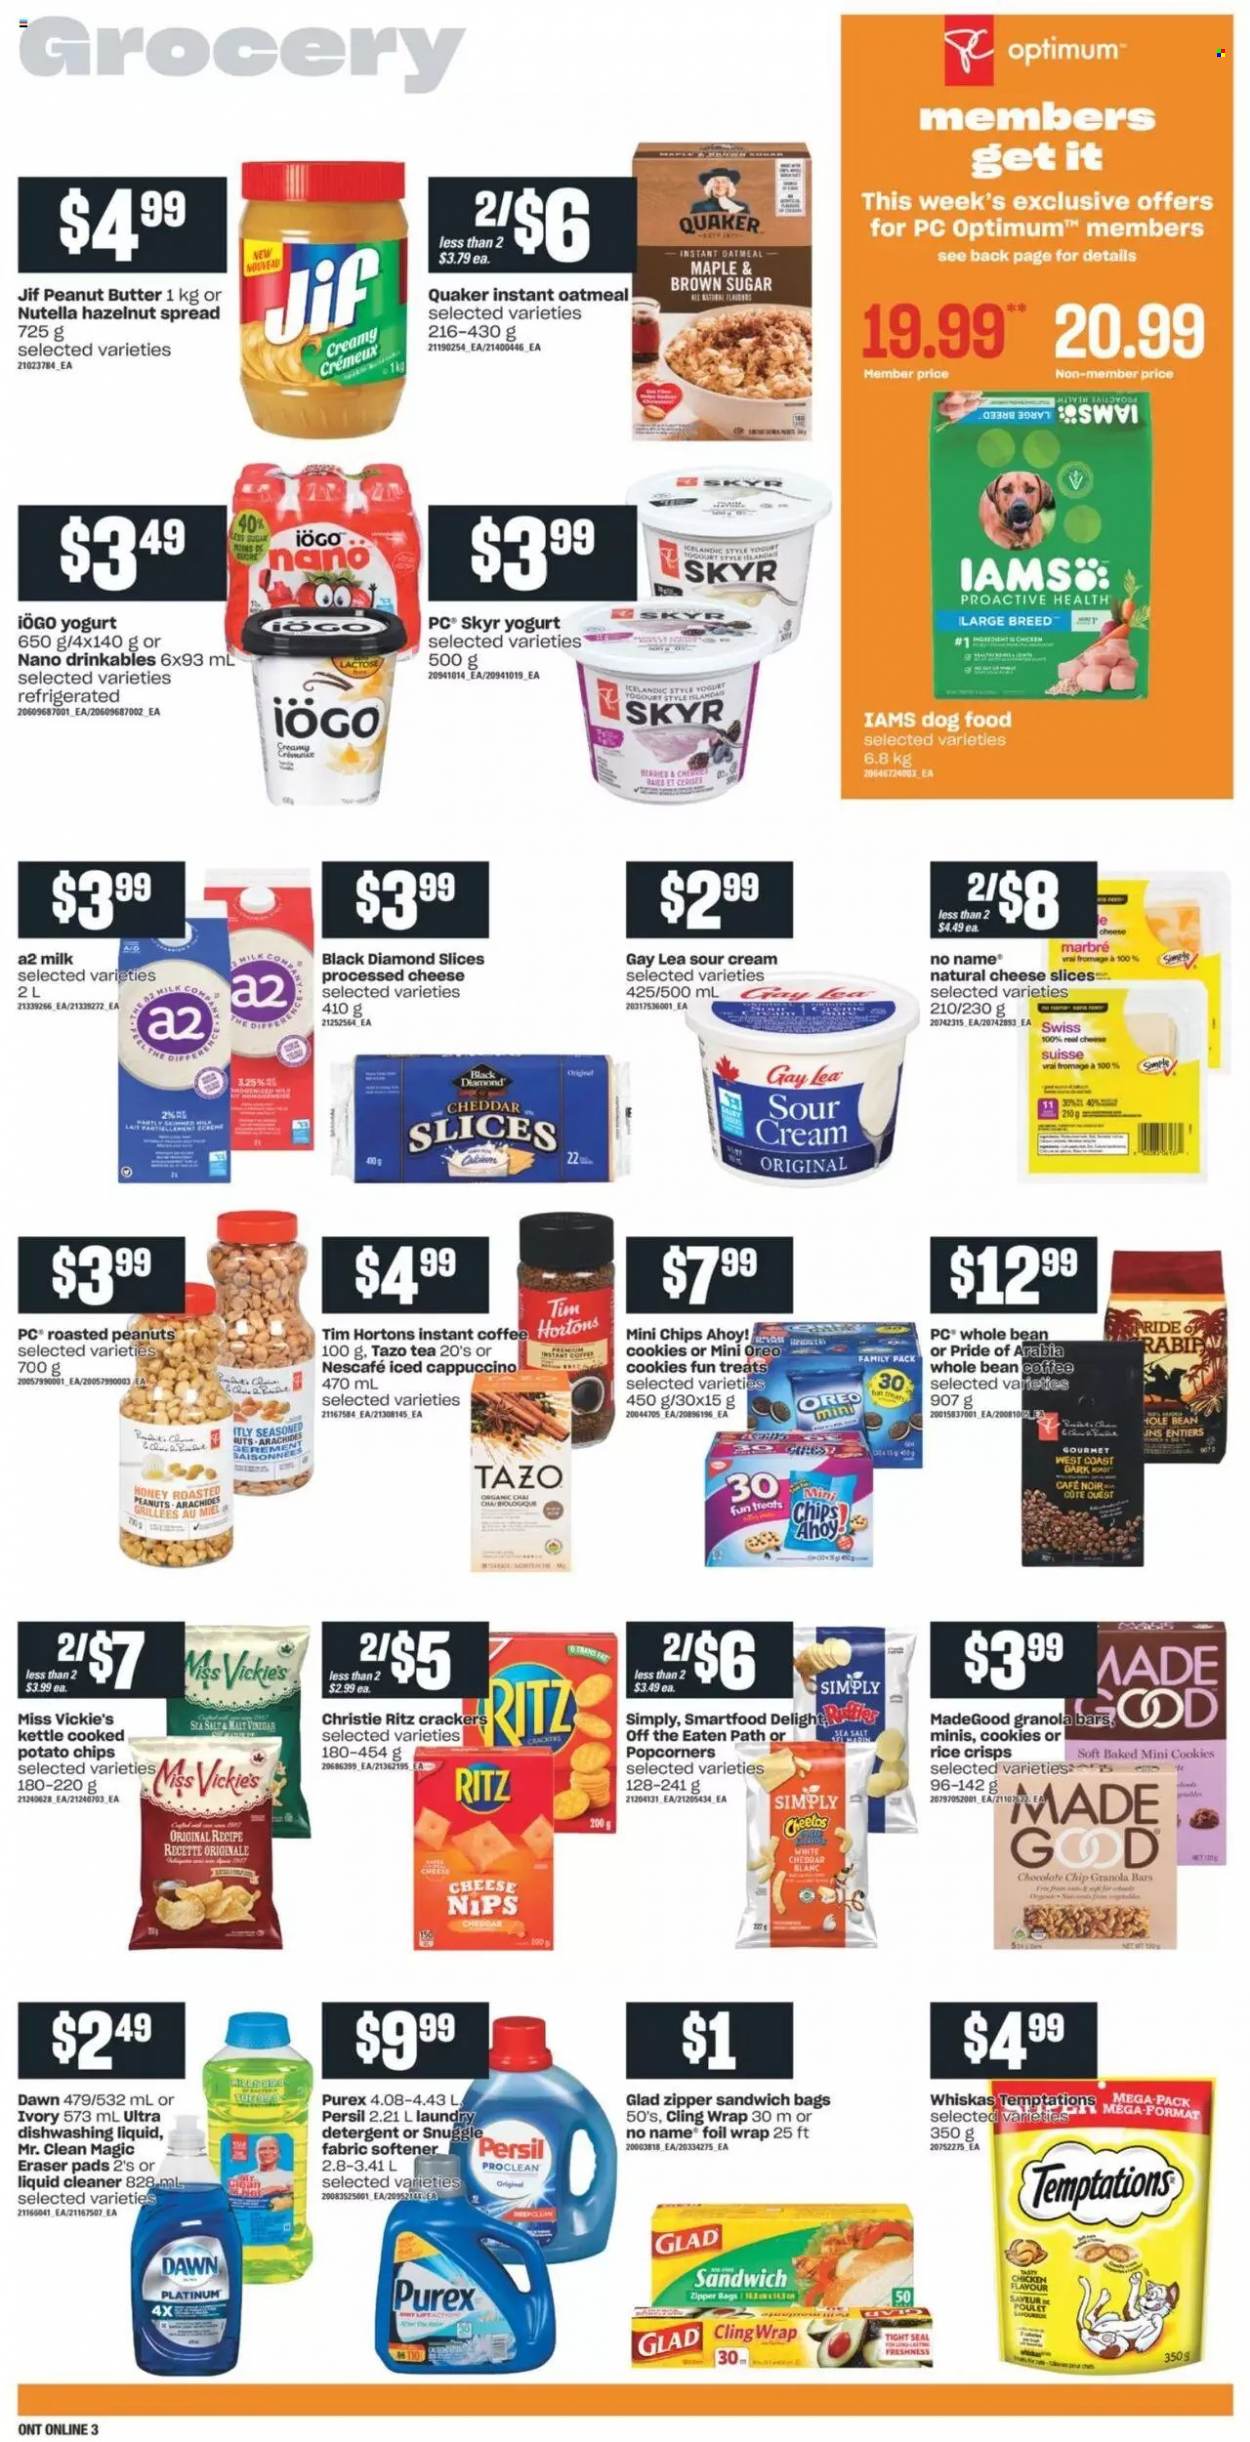 thumbnail - Independent Flyer - October 21, 2021 - October 27, 2021 - Sales products - No Name, Quaker, sliced cheese, cheese, yoghurt, milk, sour cream, cookies, crackers, NIPS, RITZ, potato chips, Smartfood, popcorn, rice crisps, oatmeal, granola bar, rice, honey, peanut butter, hazelnut spread, Jif, roasted peanuts, peanuts, tea, cappuccino, instant coffee, cleaner, liquid cleaner, Snuggle, Persil, fabric softener, laundry detergent, Purex, dishwashing liquid, bag, eraser, animal food, dog food, Optimum, Iams, Oreo, detergent, Nutella, chips, Whiskas, Nescafé. Page 7.